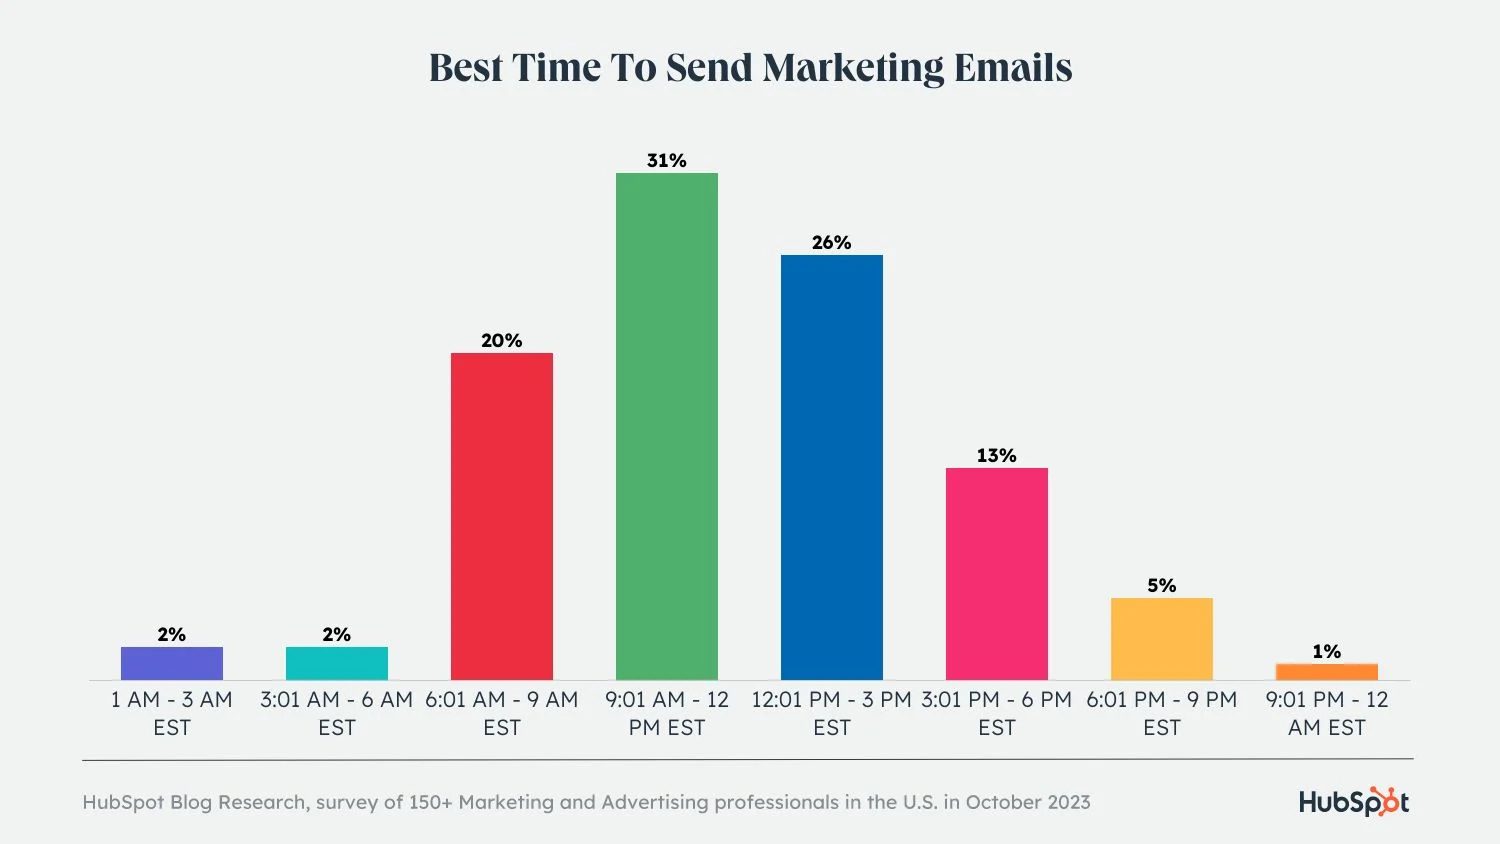 Best time to send marketing emails